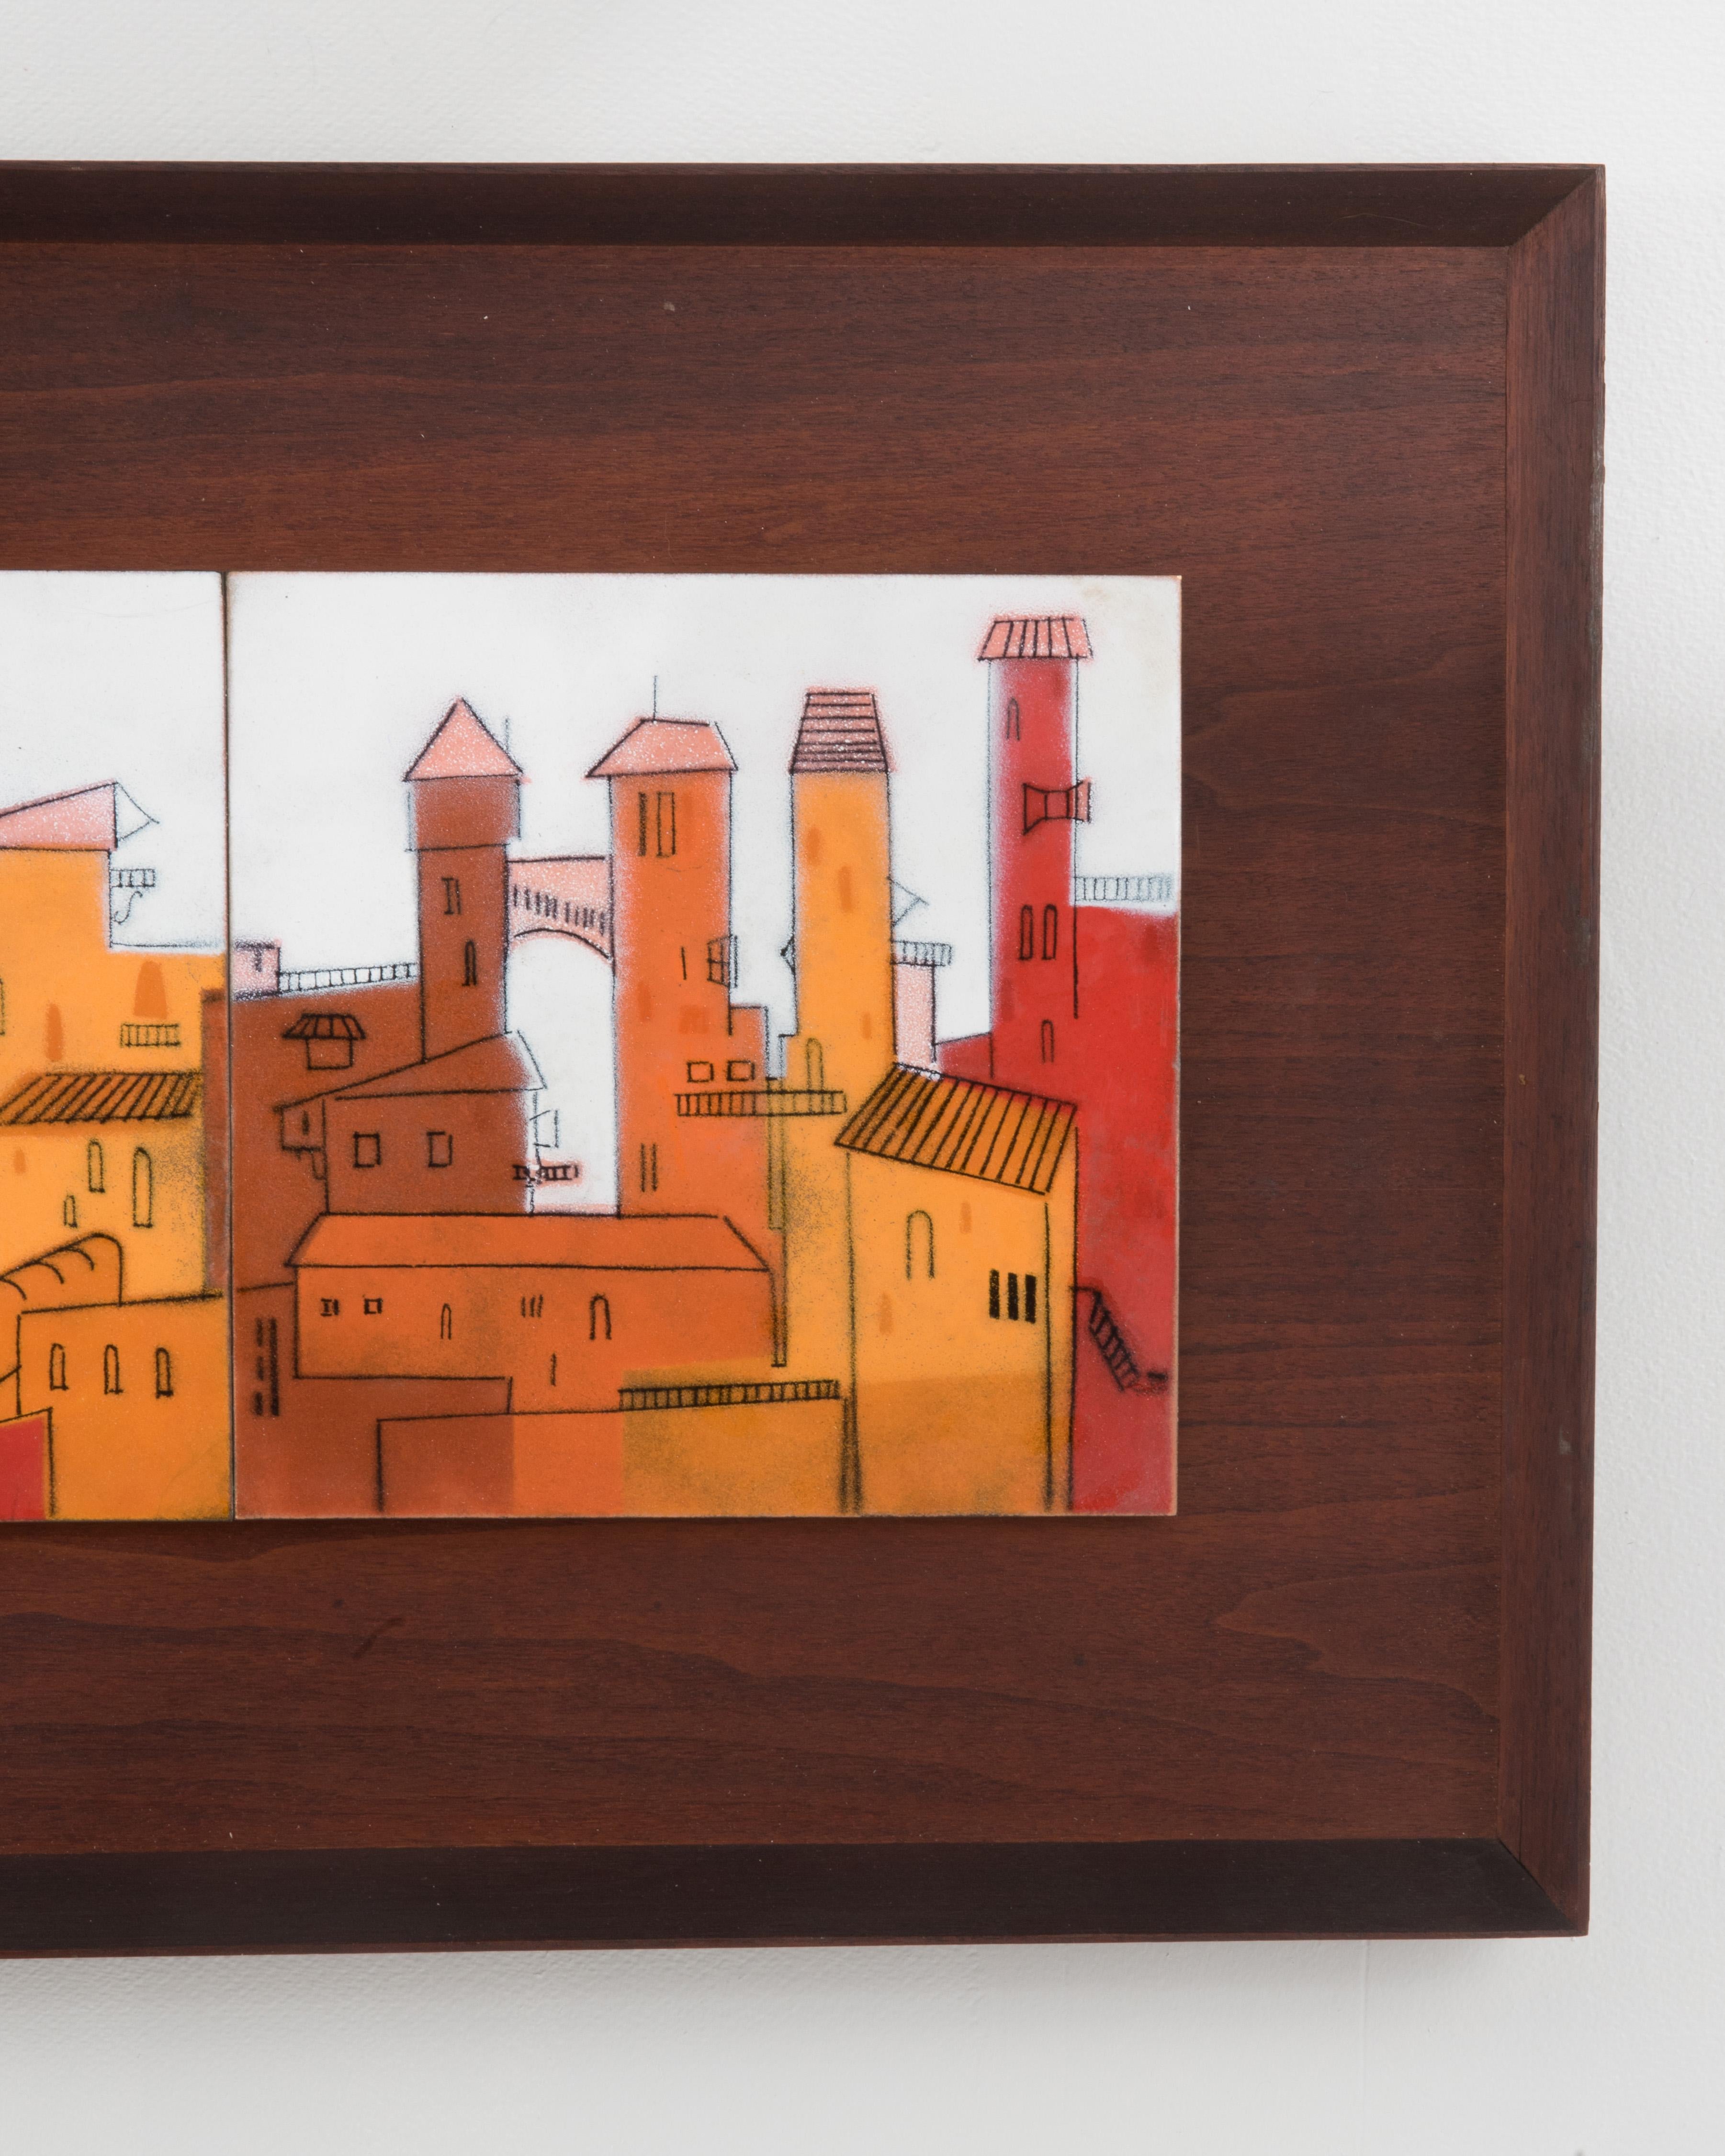 A midcentury five enamel tile frieze of an abstract cityscape in a walnut frame.

Each of the tiles is H 11.1